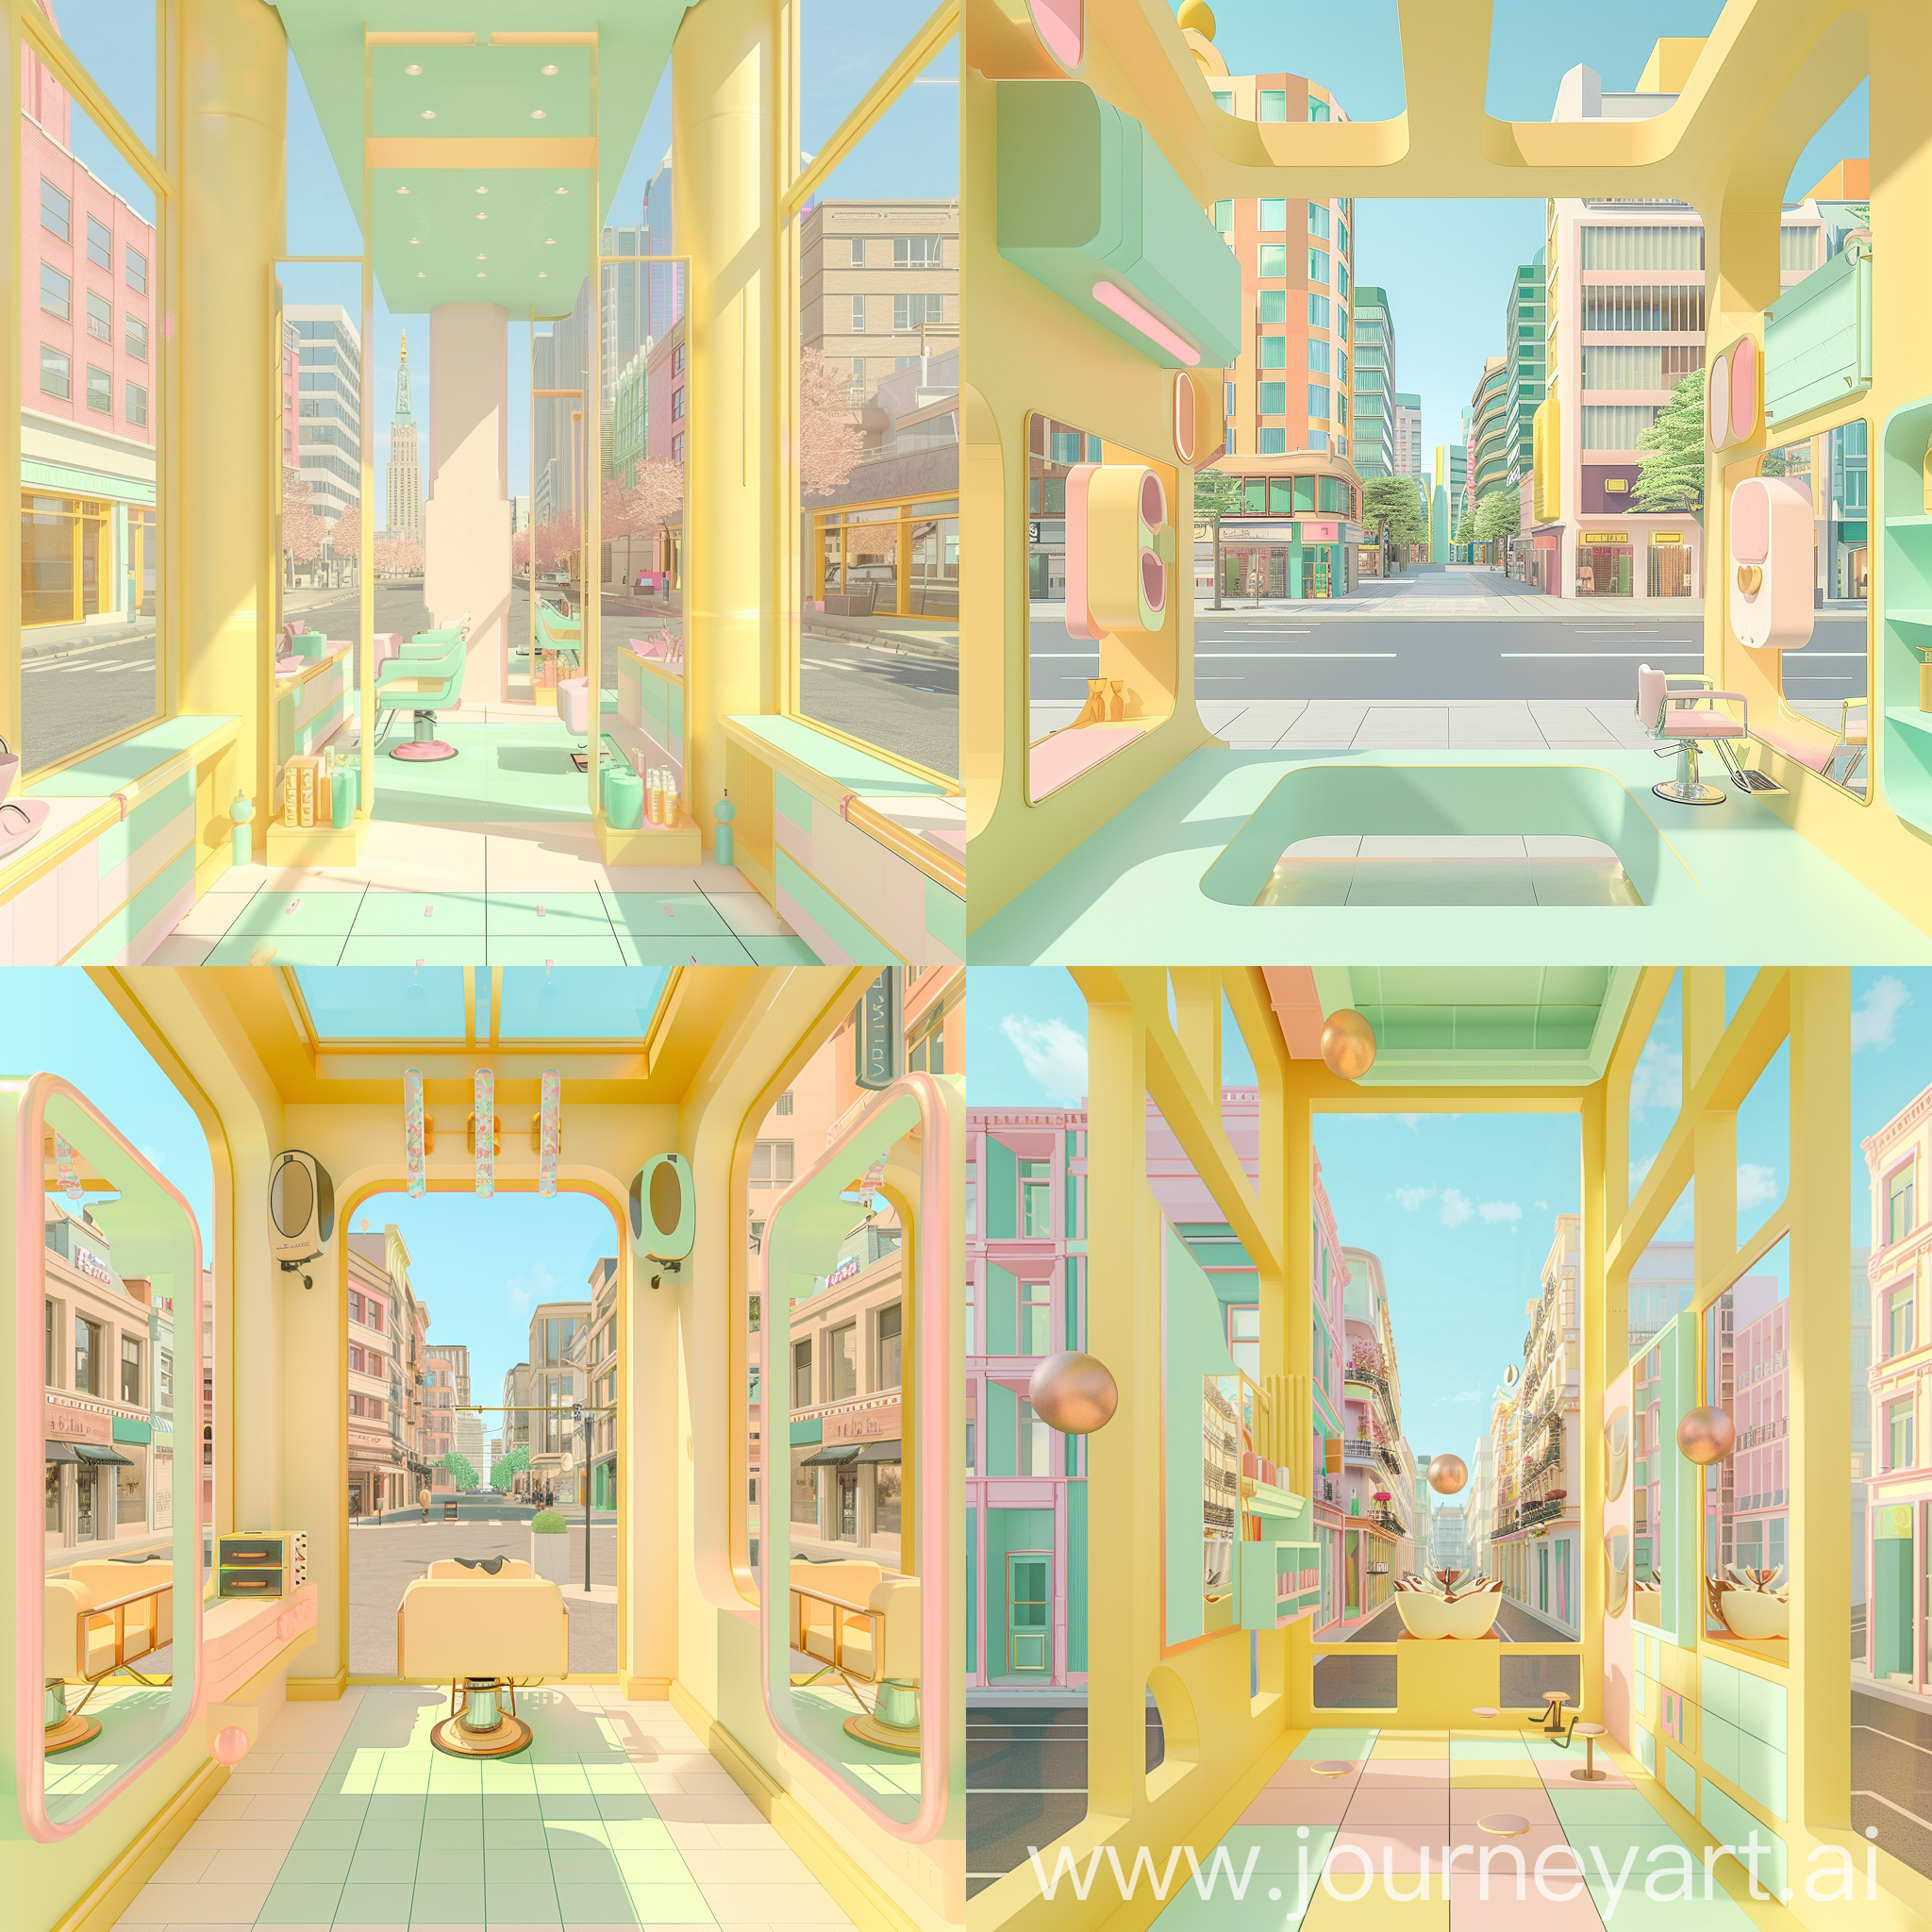 3D game, vector illustration, entryway of a hairsalon, wide 25 degree angle view, city street background,   neighbour buildings to the right and to the left  are fully visible, large square windows where you can see hairdresser equipment, pastel yellow and mint  with pink gold accdents